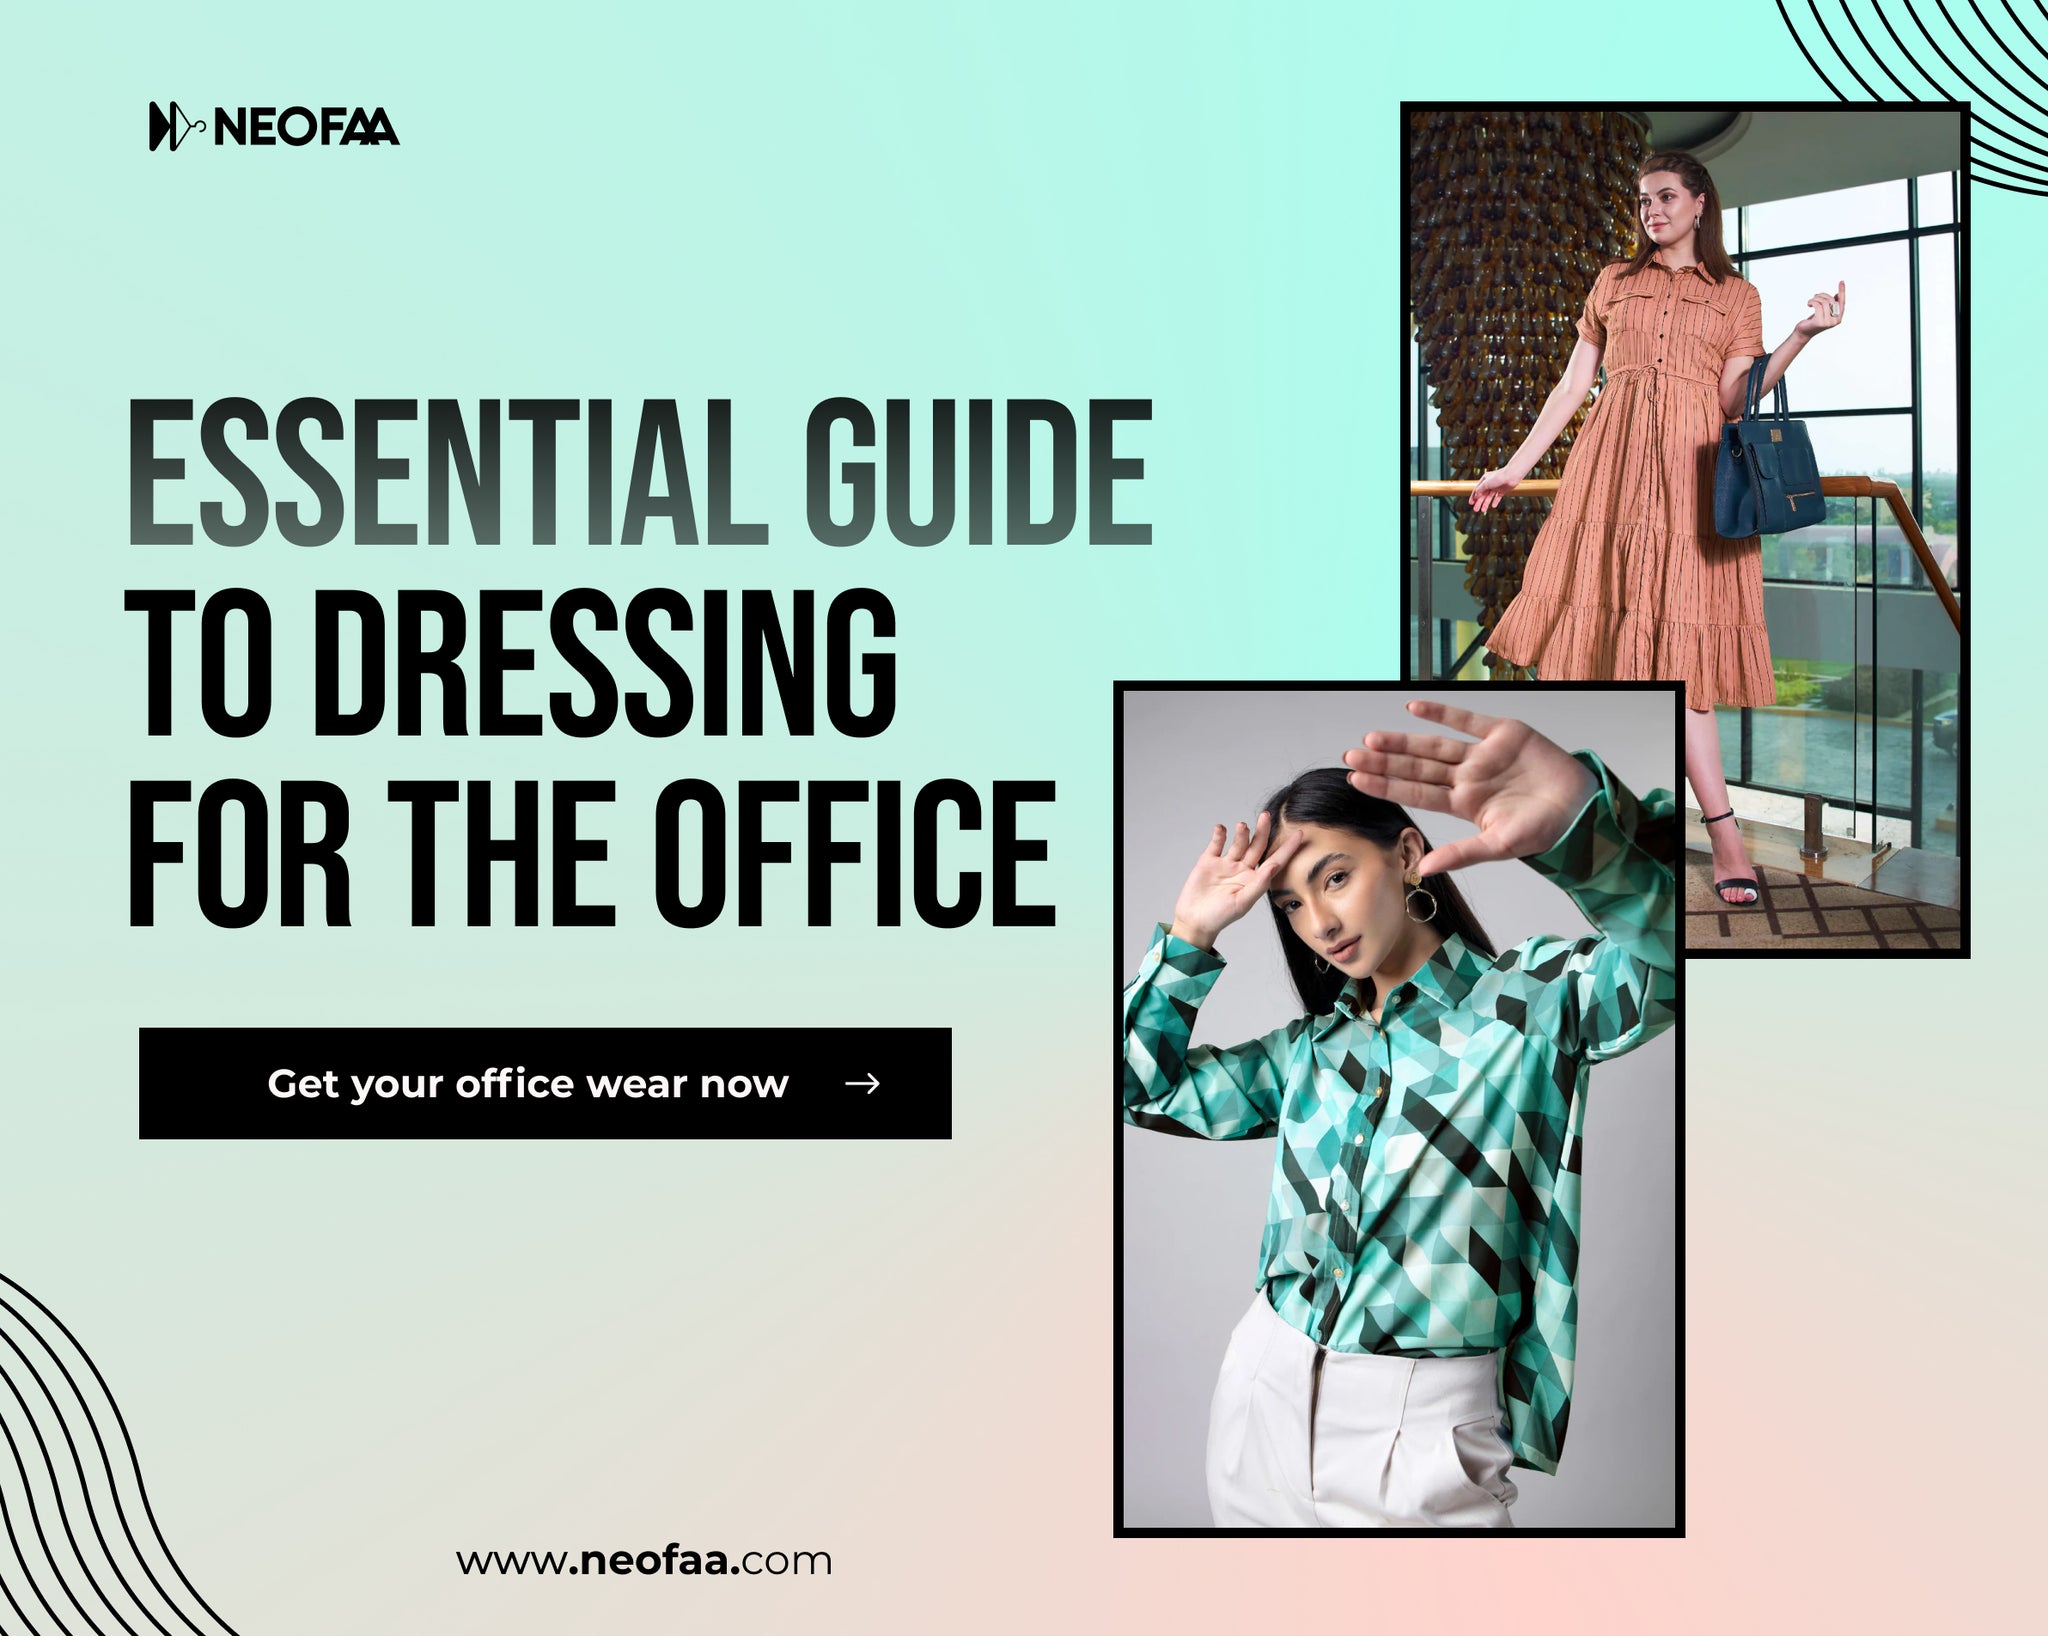 Essential Guide to Dressing for the Office!